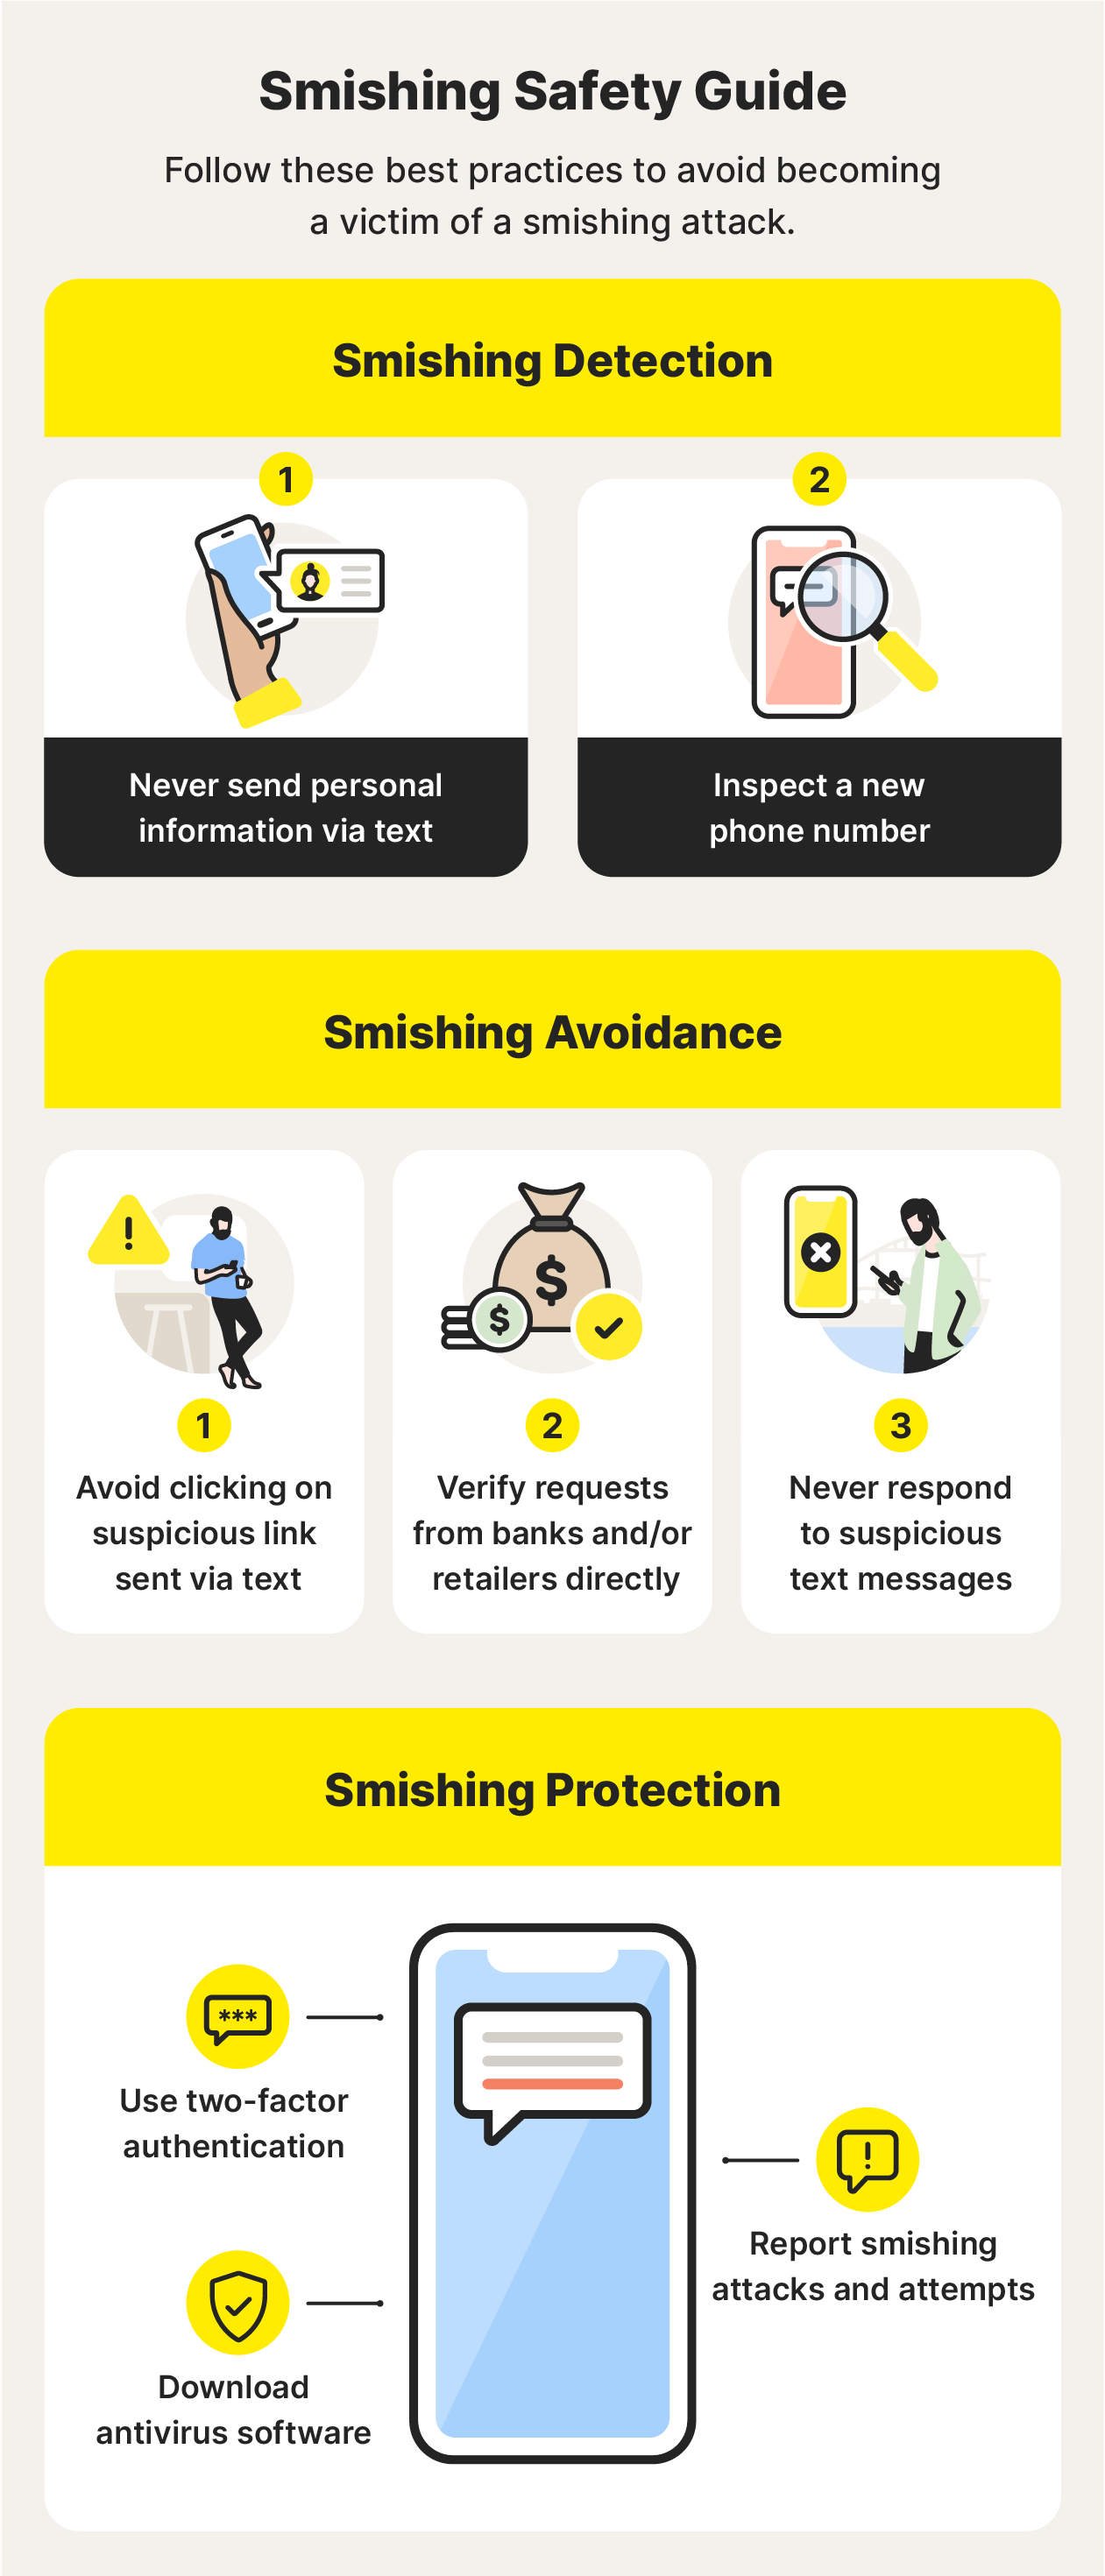 How to detect, avoid, and protect against smishing attacks.